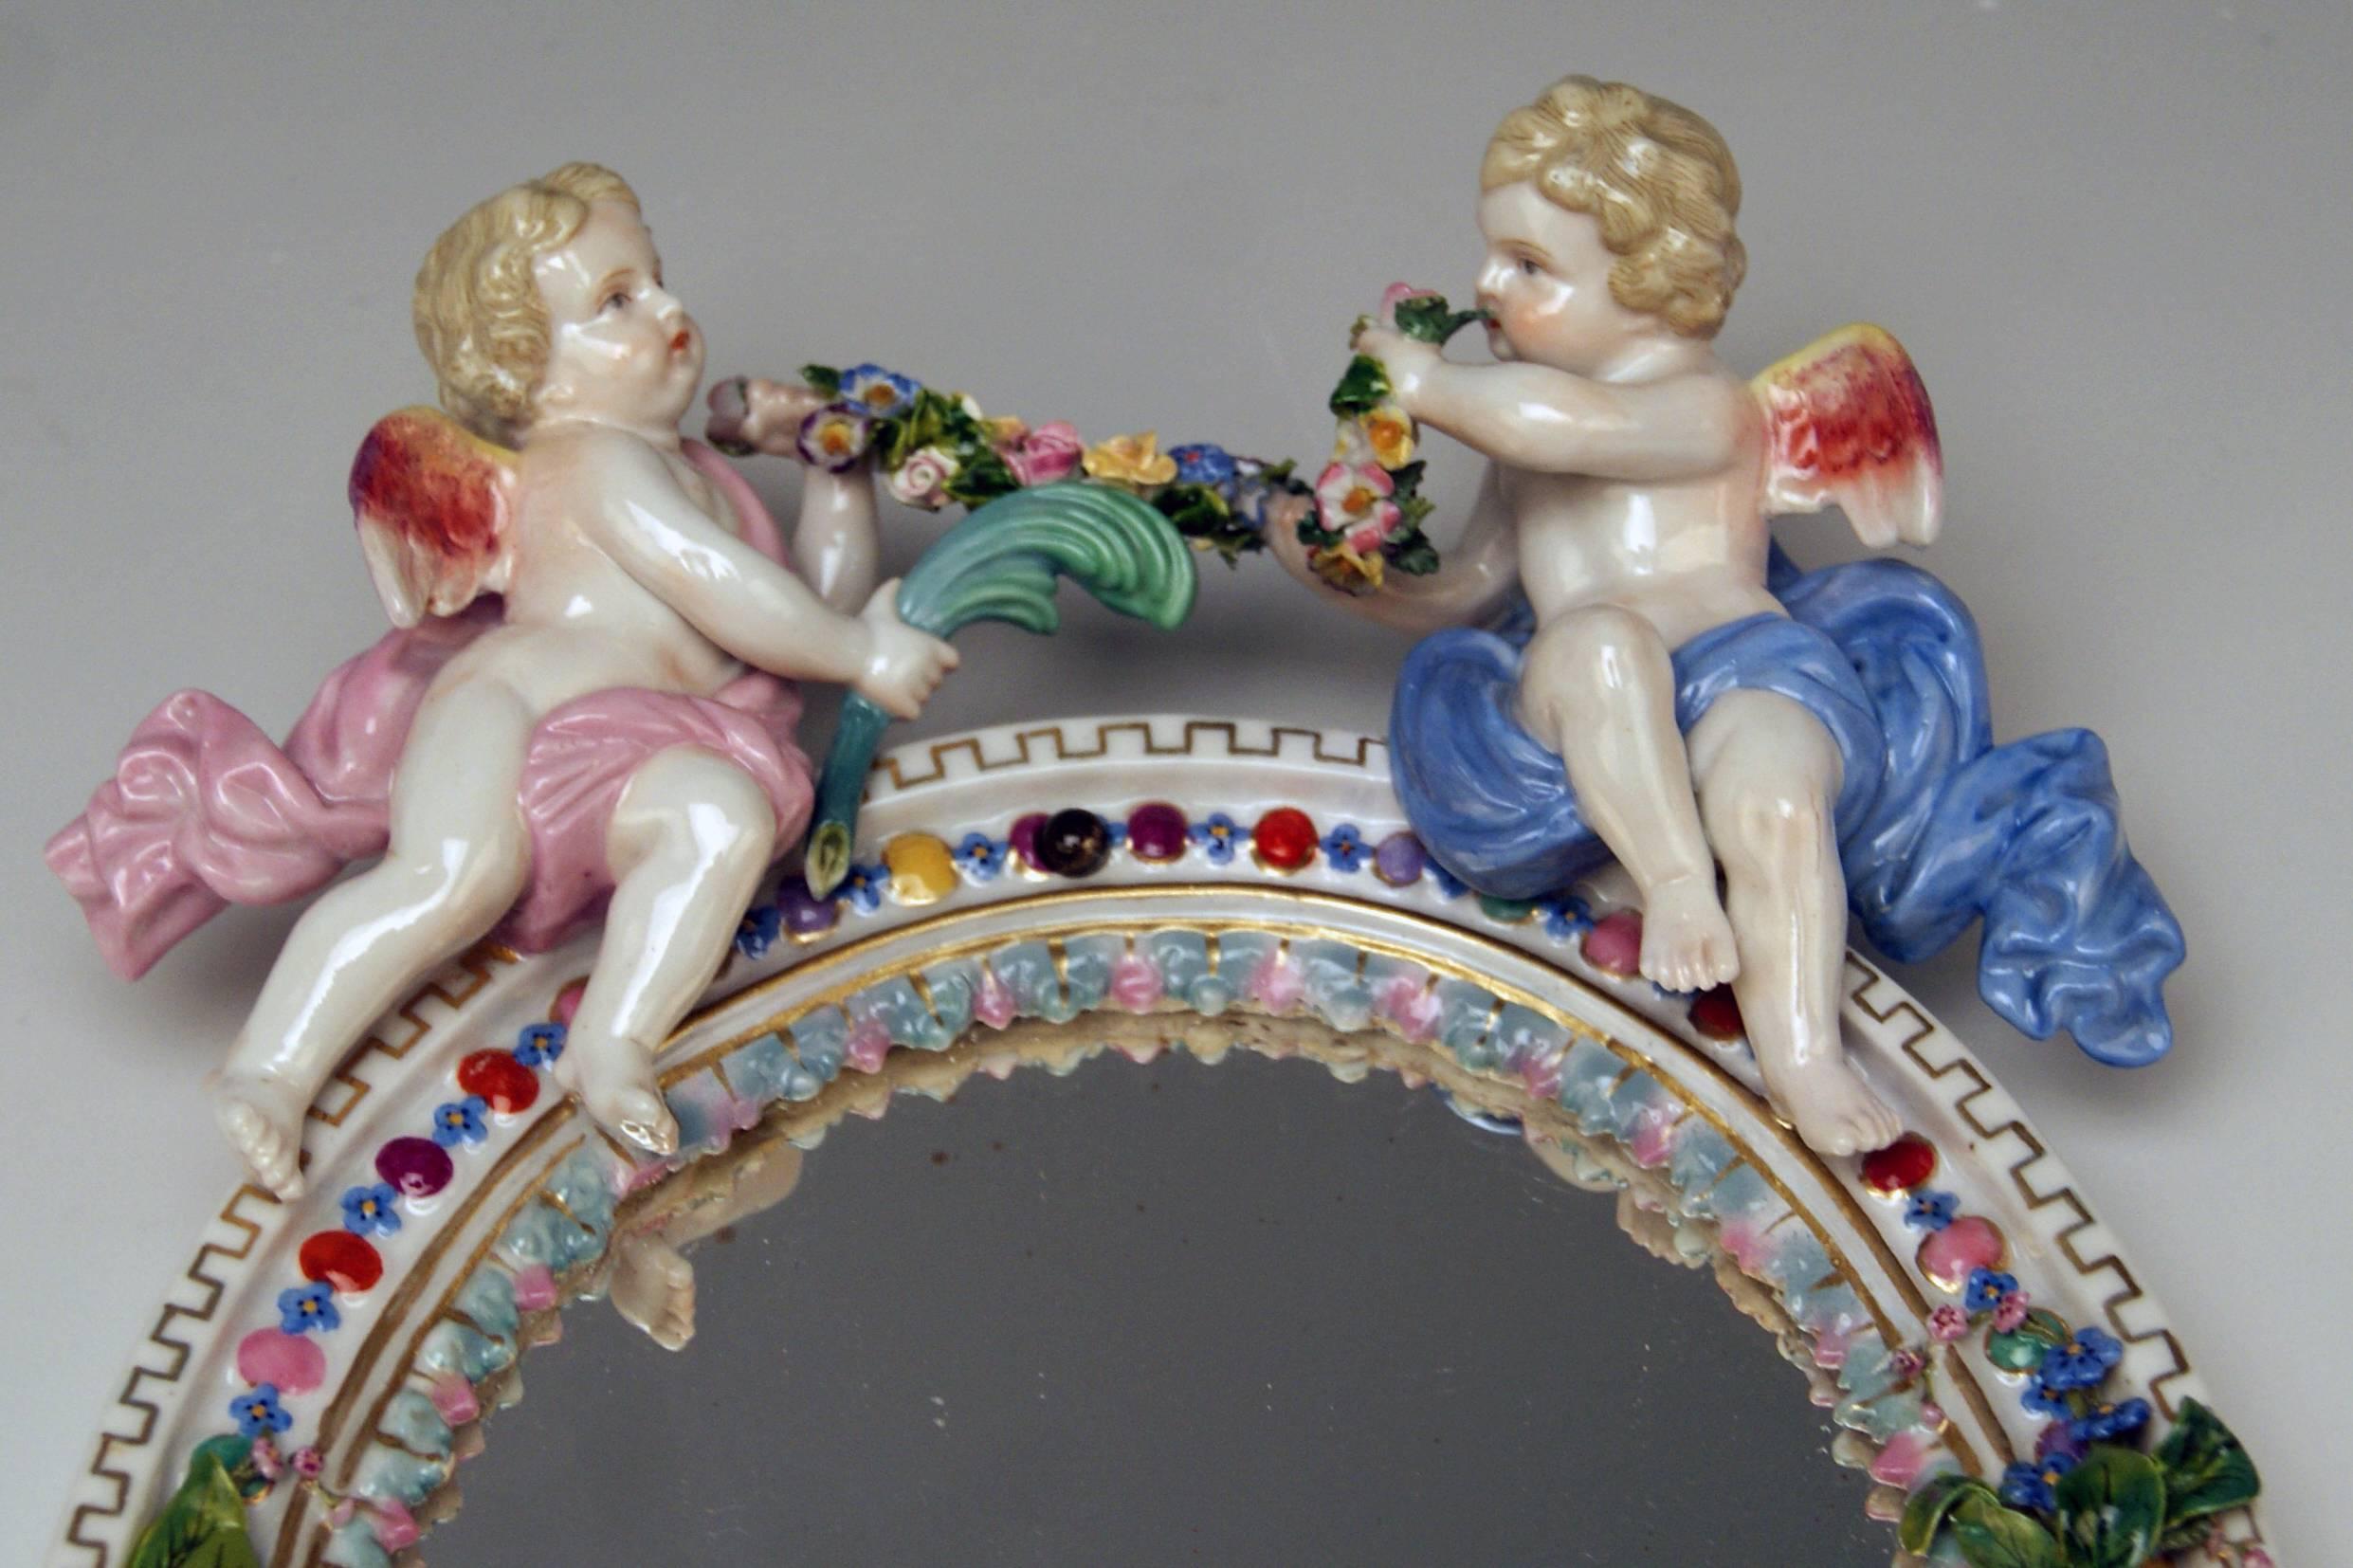 Meissen wall mirror with cherubs

Manufactory:  Meissen
Dating: 19th century / made circa 1850
Material: white porcelain , glossy finish
Technique: porcelain (modelled and fired) / multicolored painted

Item type:
Meissen stunning wall